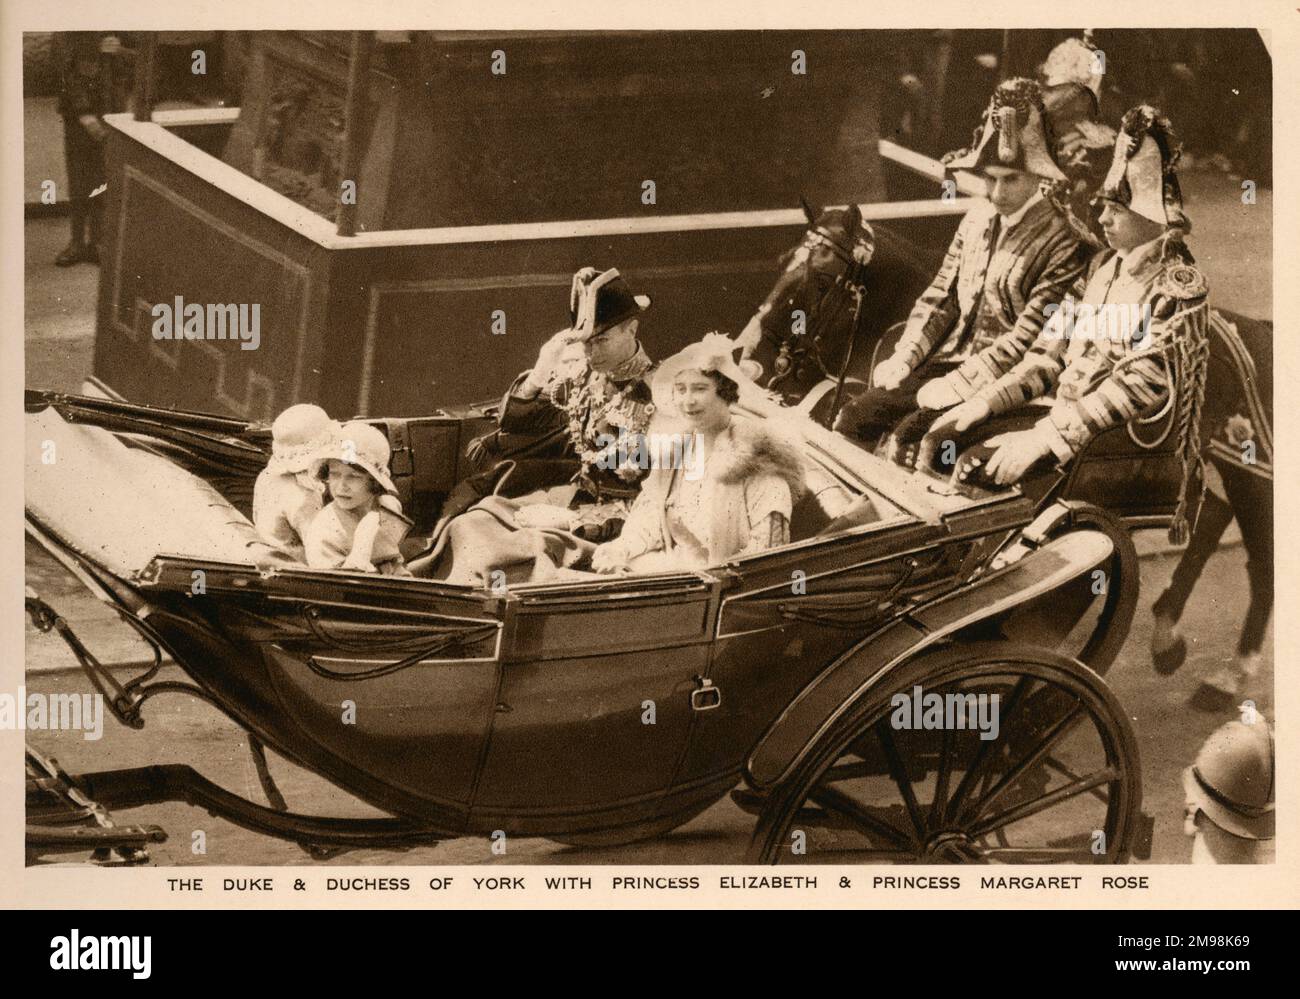 The Duke and Duchess of York with Princess Elizabeth and Princess Margaret Rose, in an open carriage on their way to St Paul's Cathedral for the Royal Silver Jubilee thanksgiving service, on 6 May 1935, to celebrate King George V's and Queen Mary's 25 years on the British throne. Stock Photo